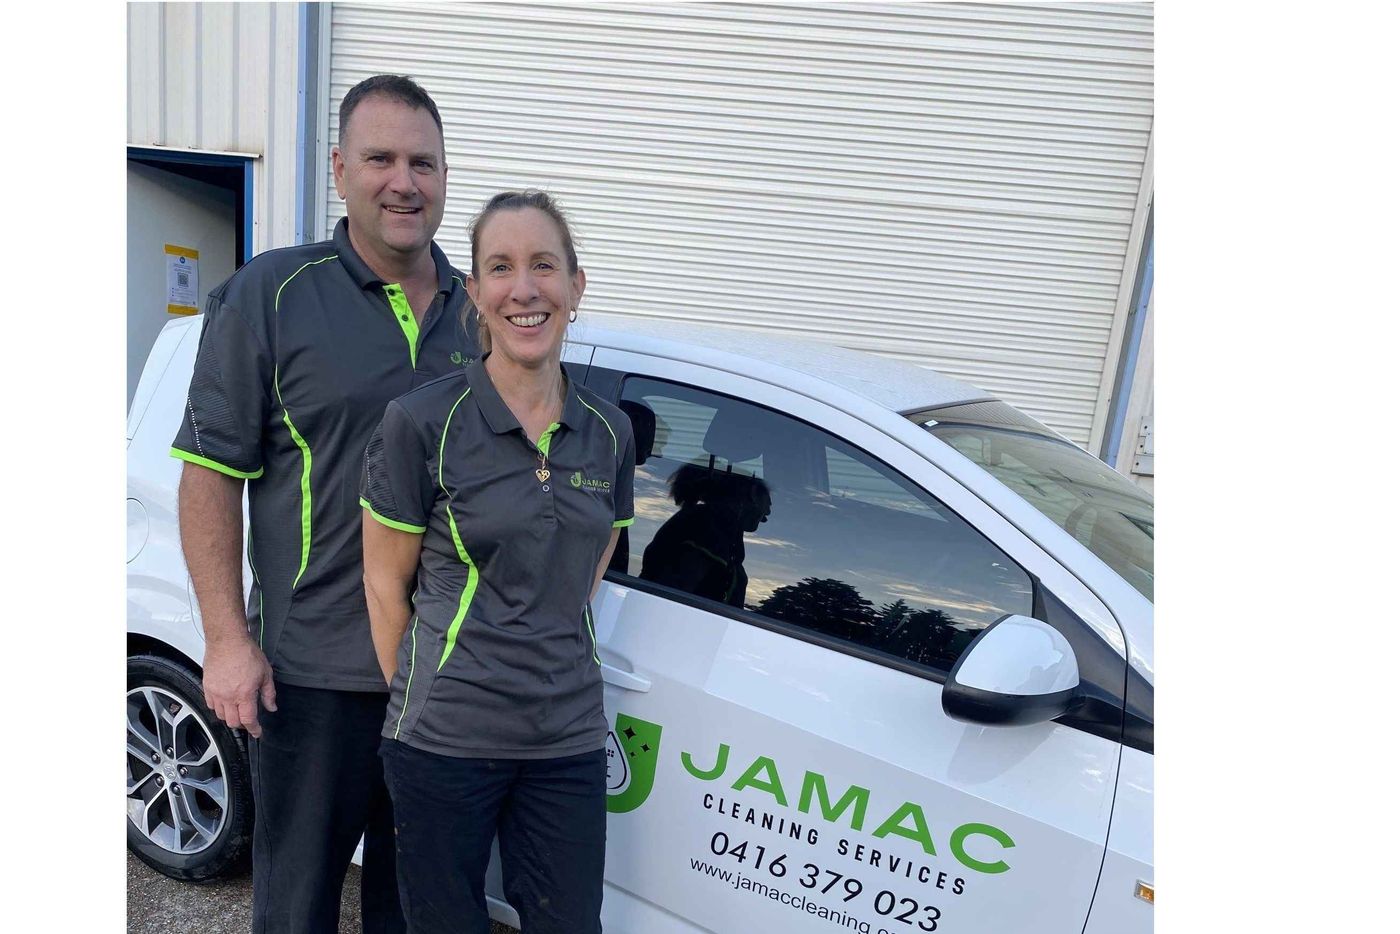 Jamac Cleaning Services image